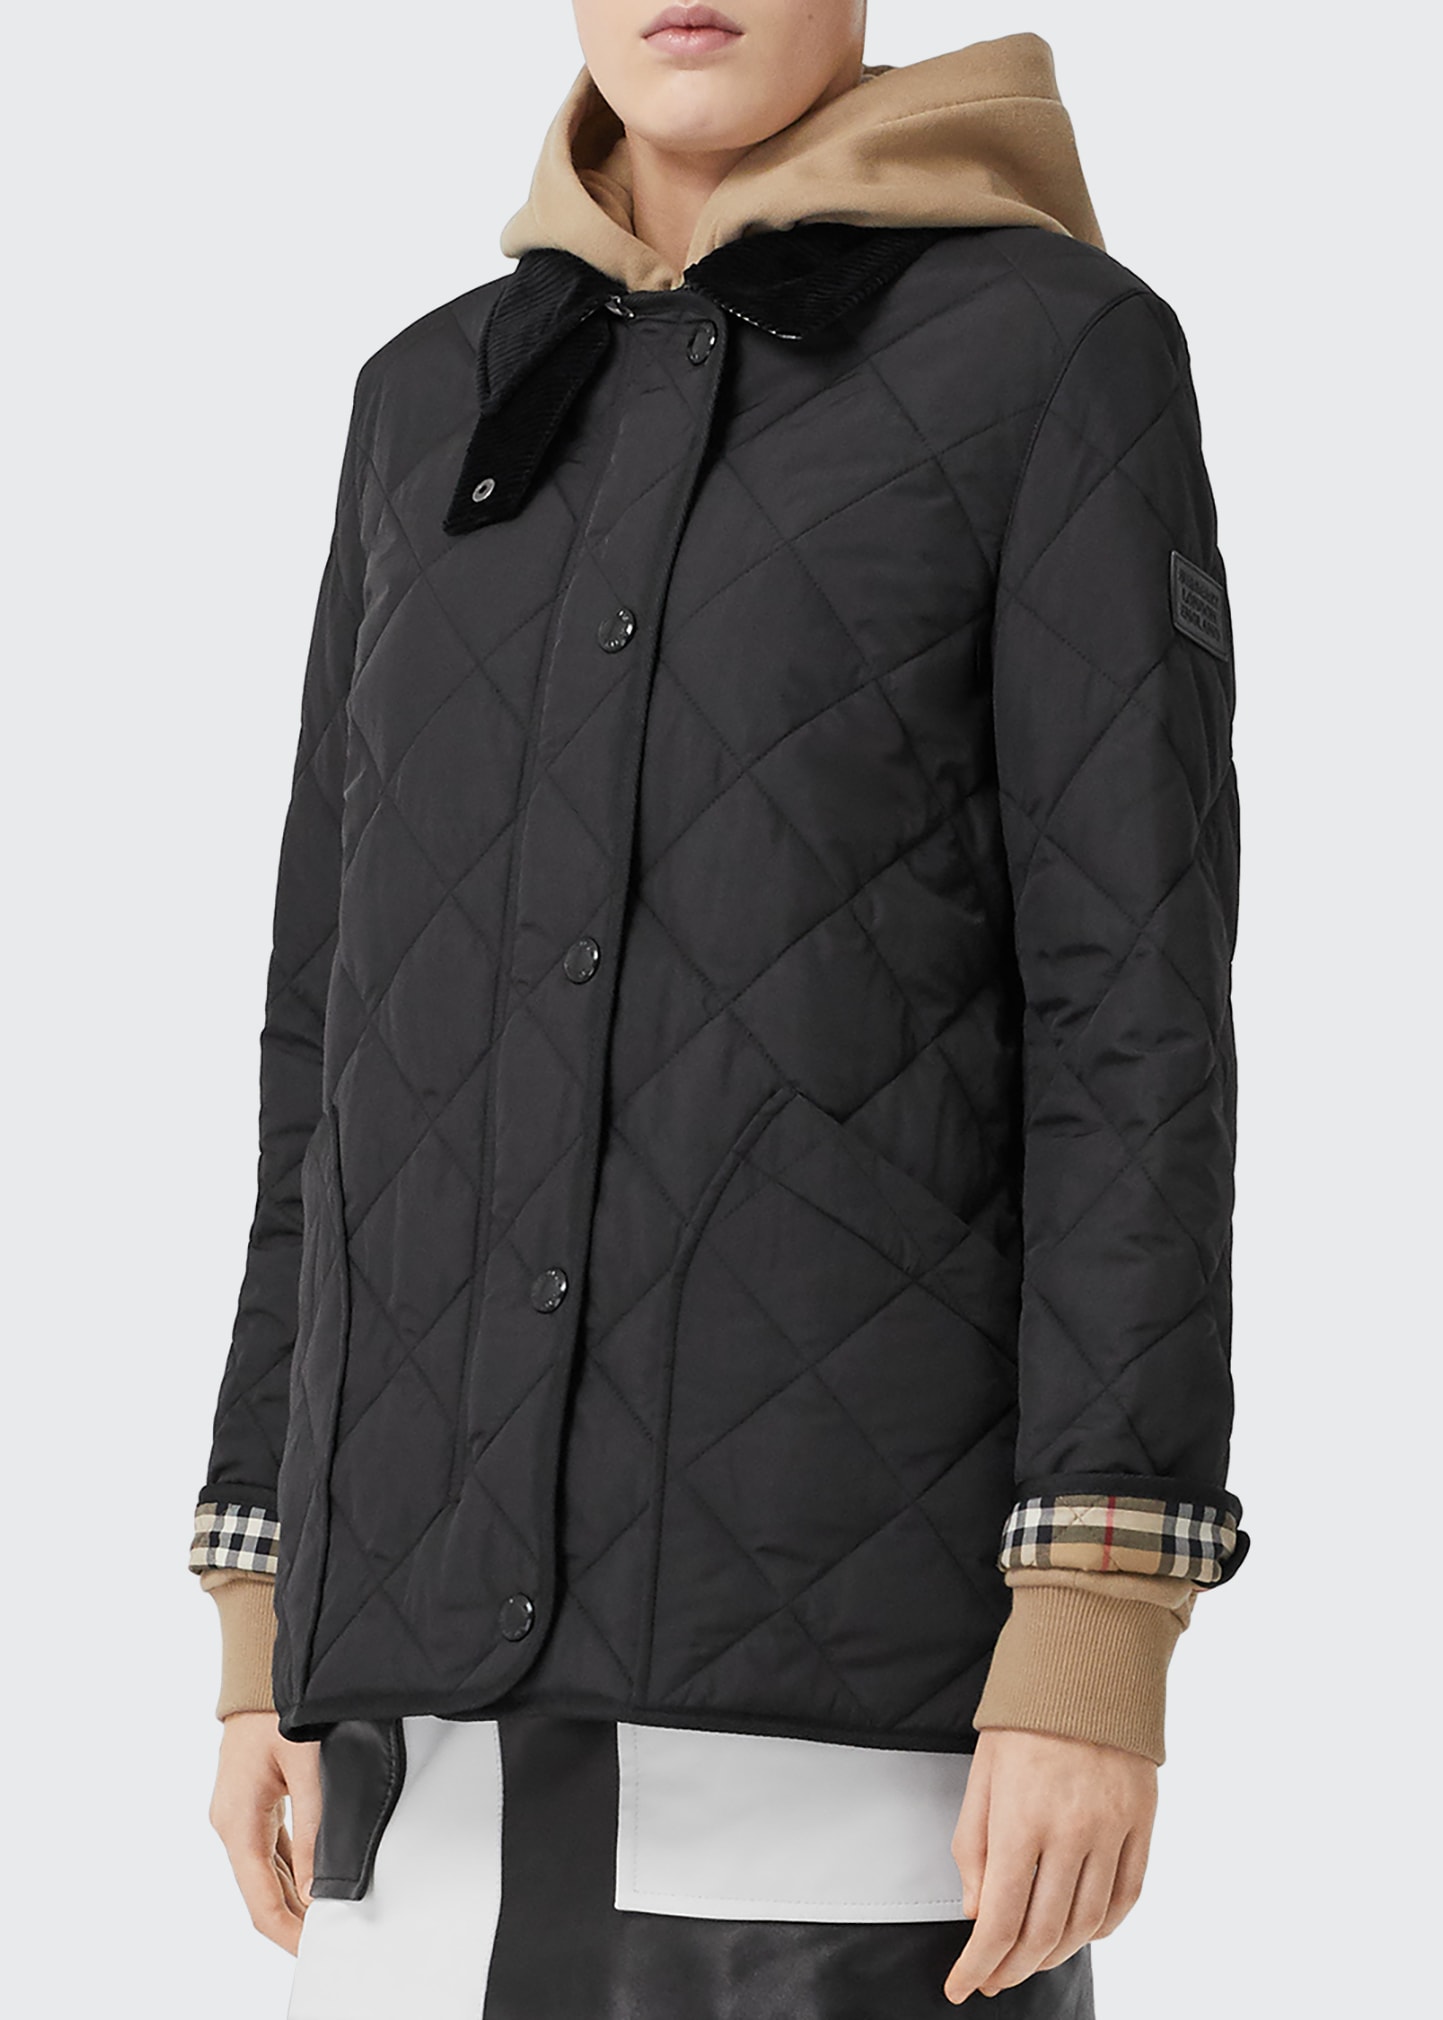 Burberry Cotswold Quilted Barn Jacket, Black